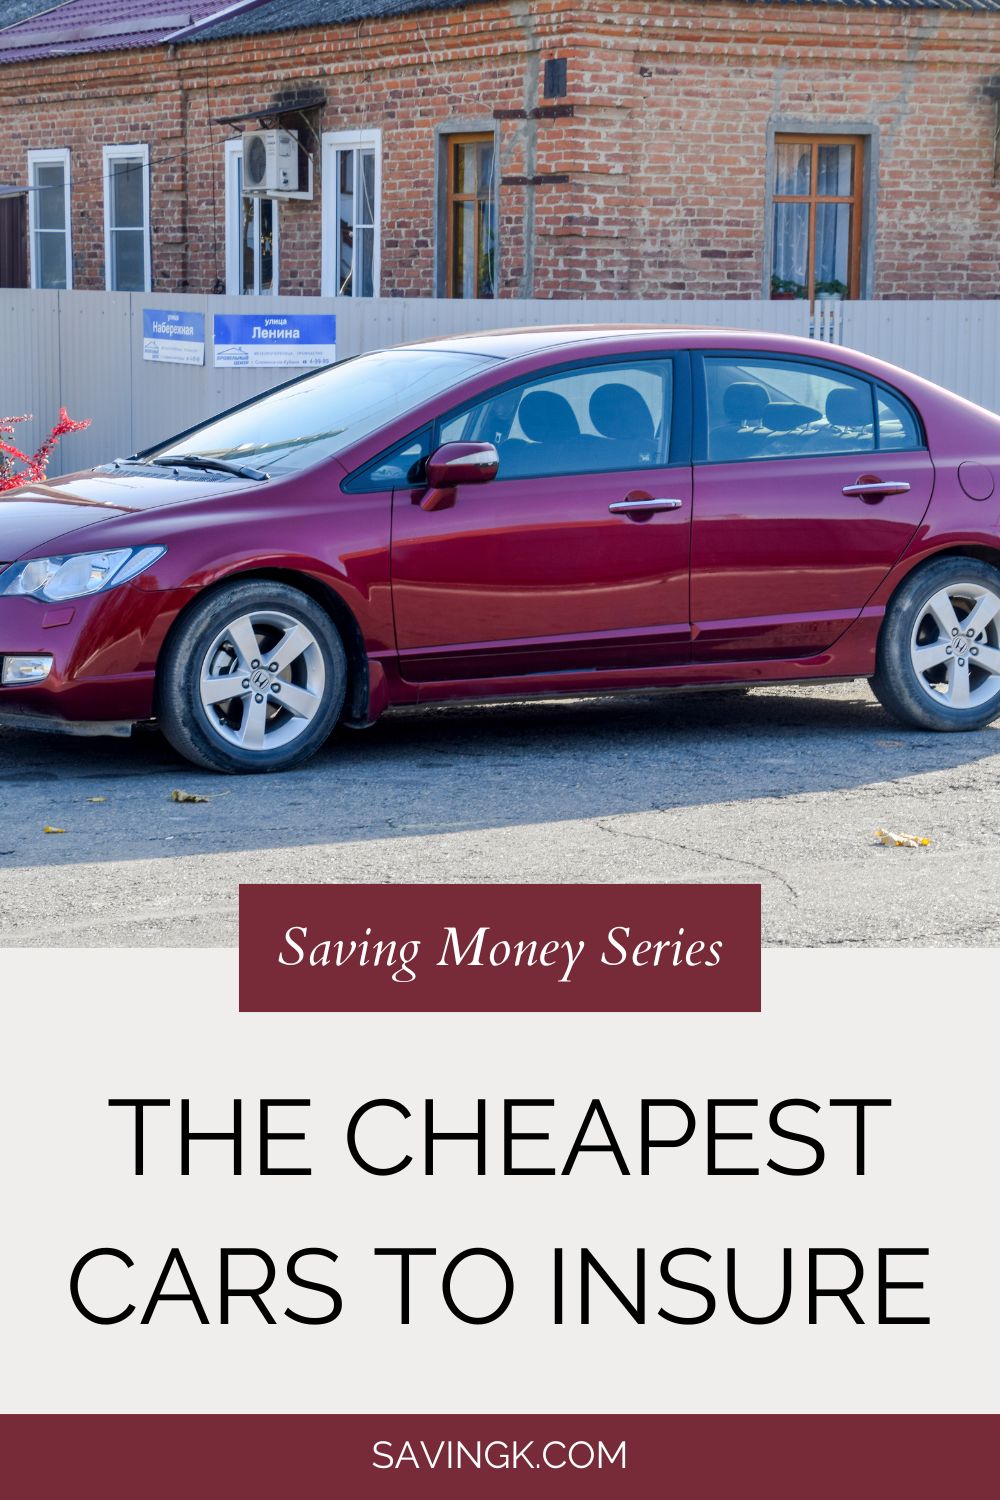 The Cheapest Cars to Insure